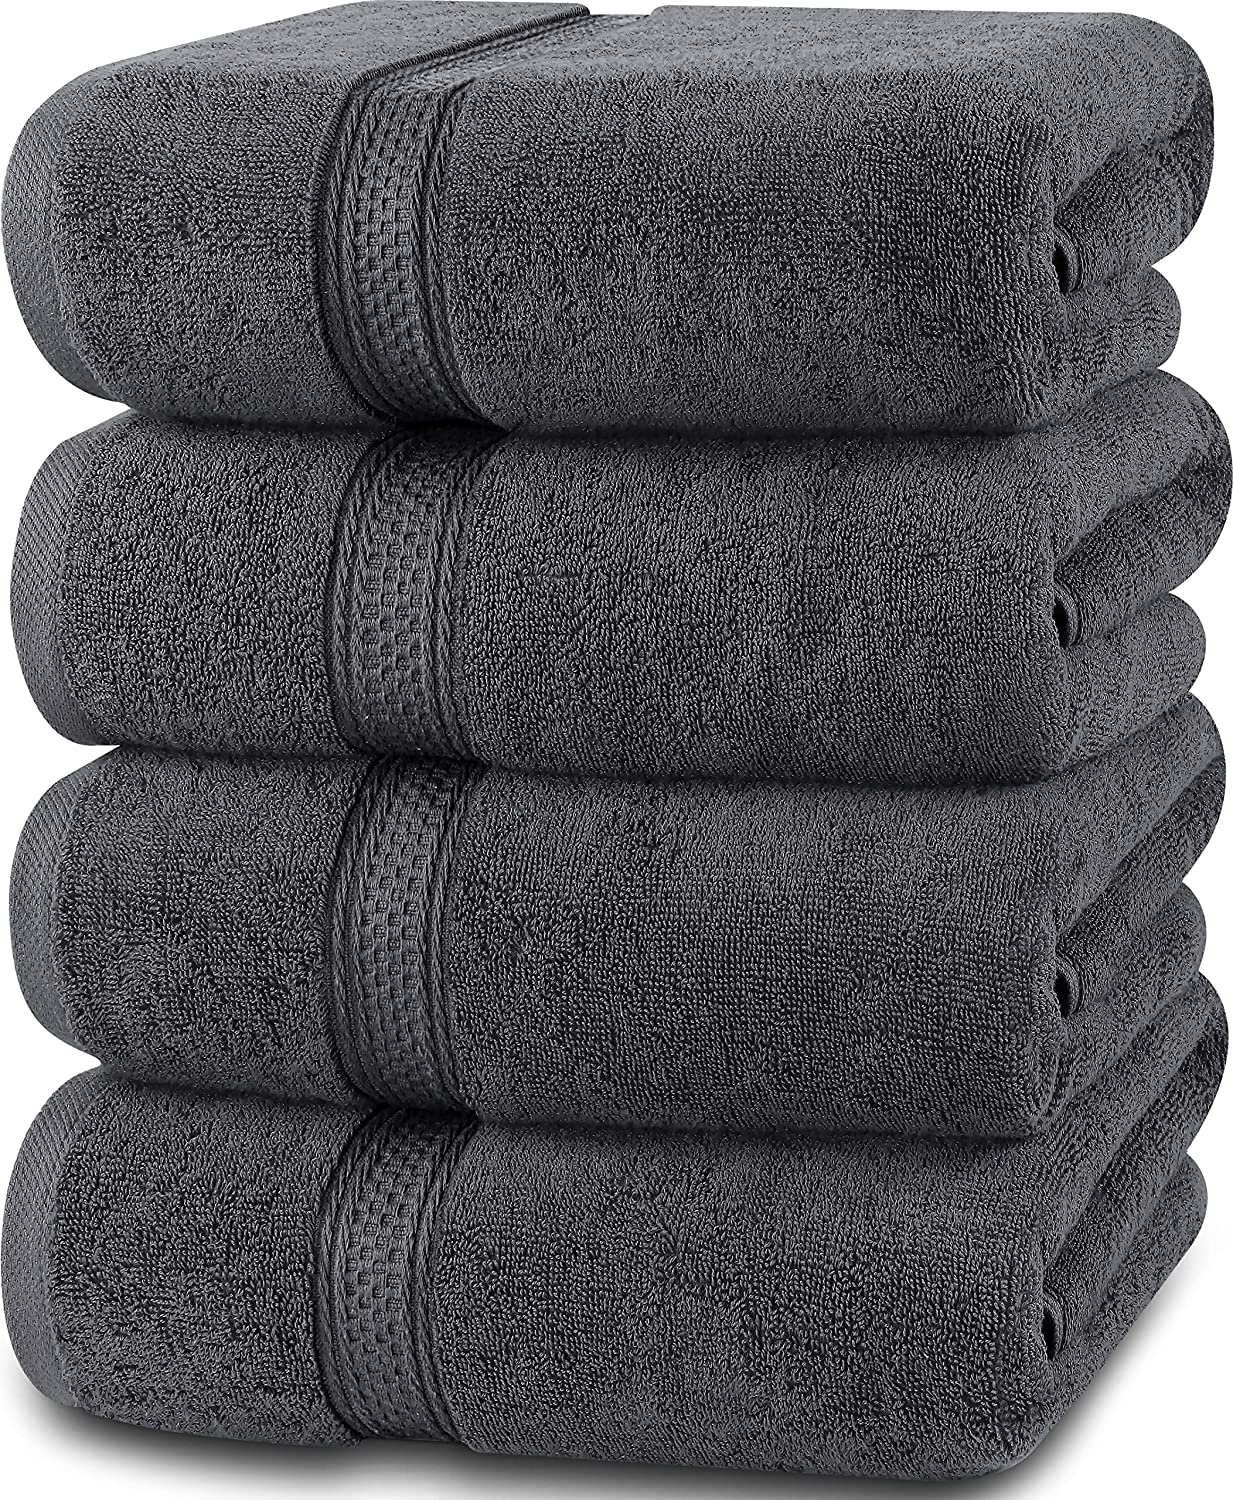 Utopia Towels Pink Towel Set 8-Piece - Viscose Stripe Towels - 600 GSM Ring  Spun Cotton - Highly Absorbent Towels (Pack of 8) 